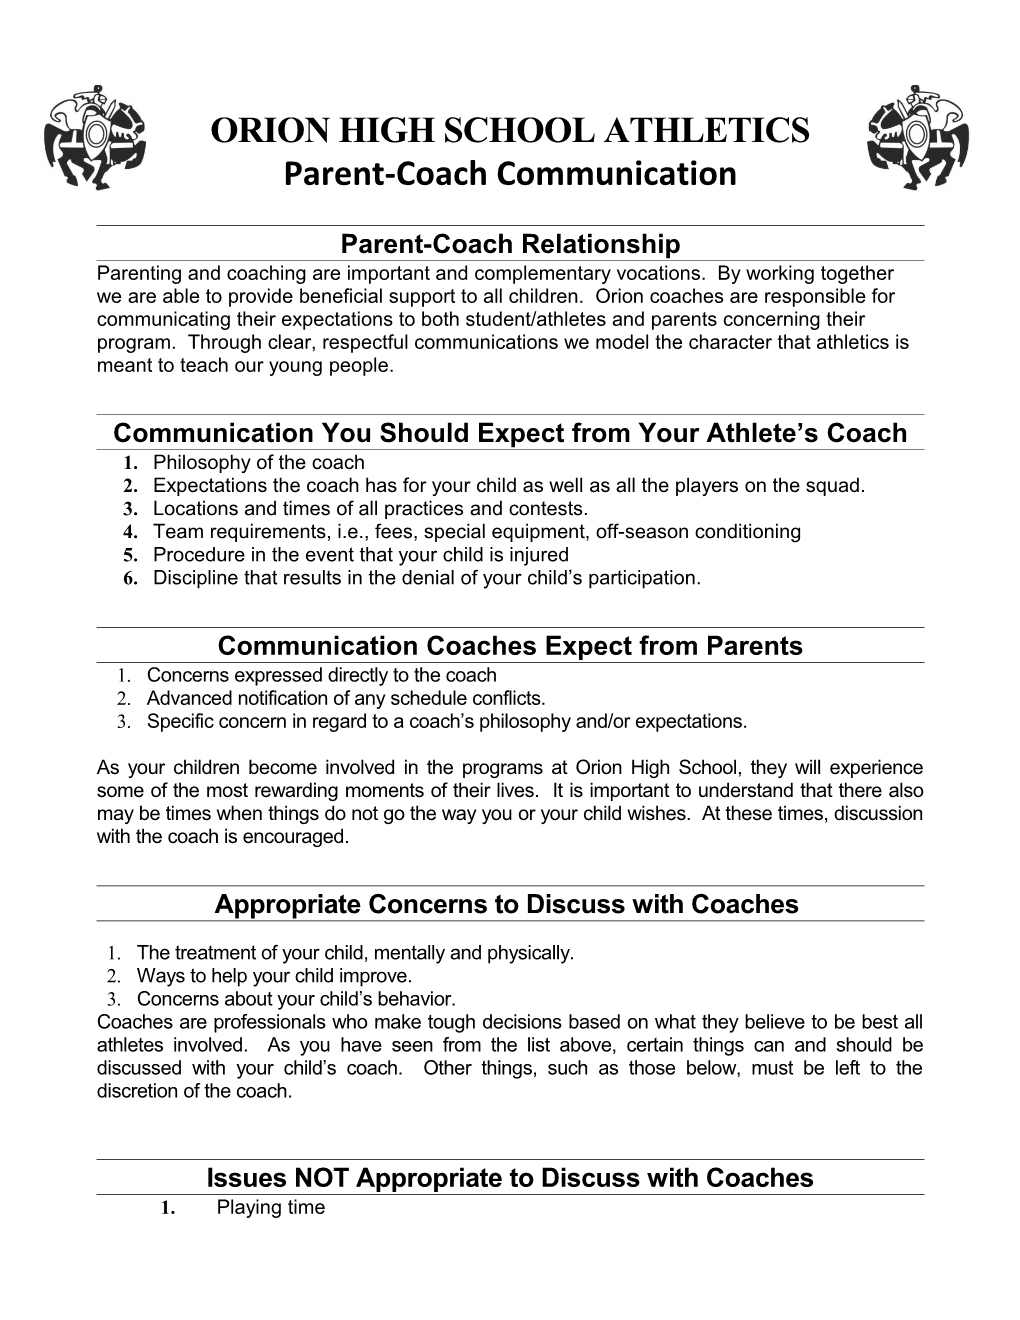 Communication You Should Expect from Your Athlete S Coach